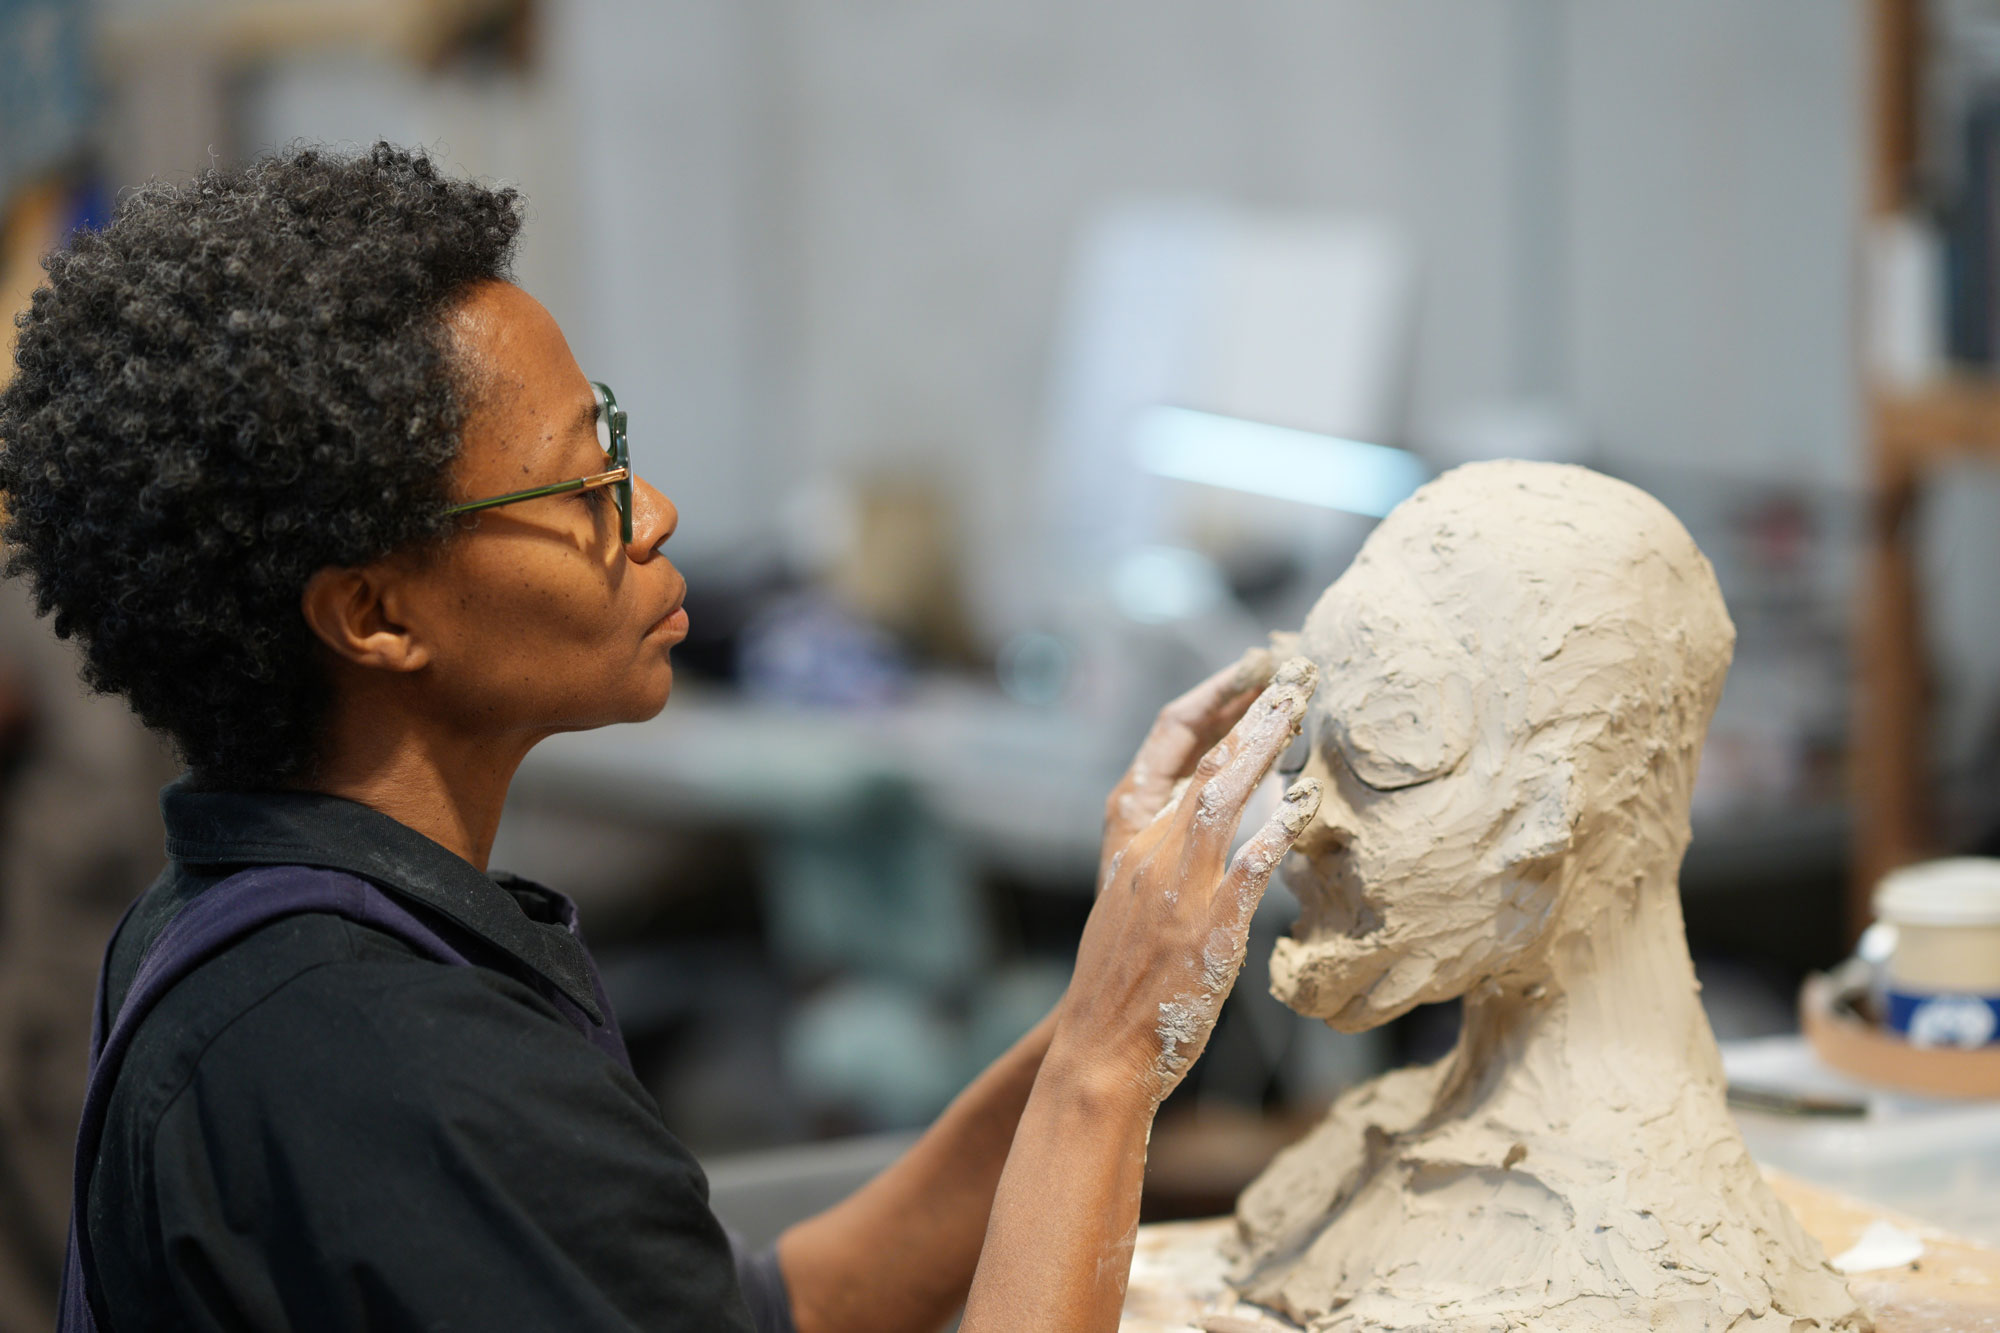 Black person works on a sculpture of a head with their hands